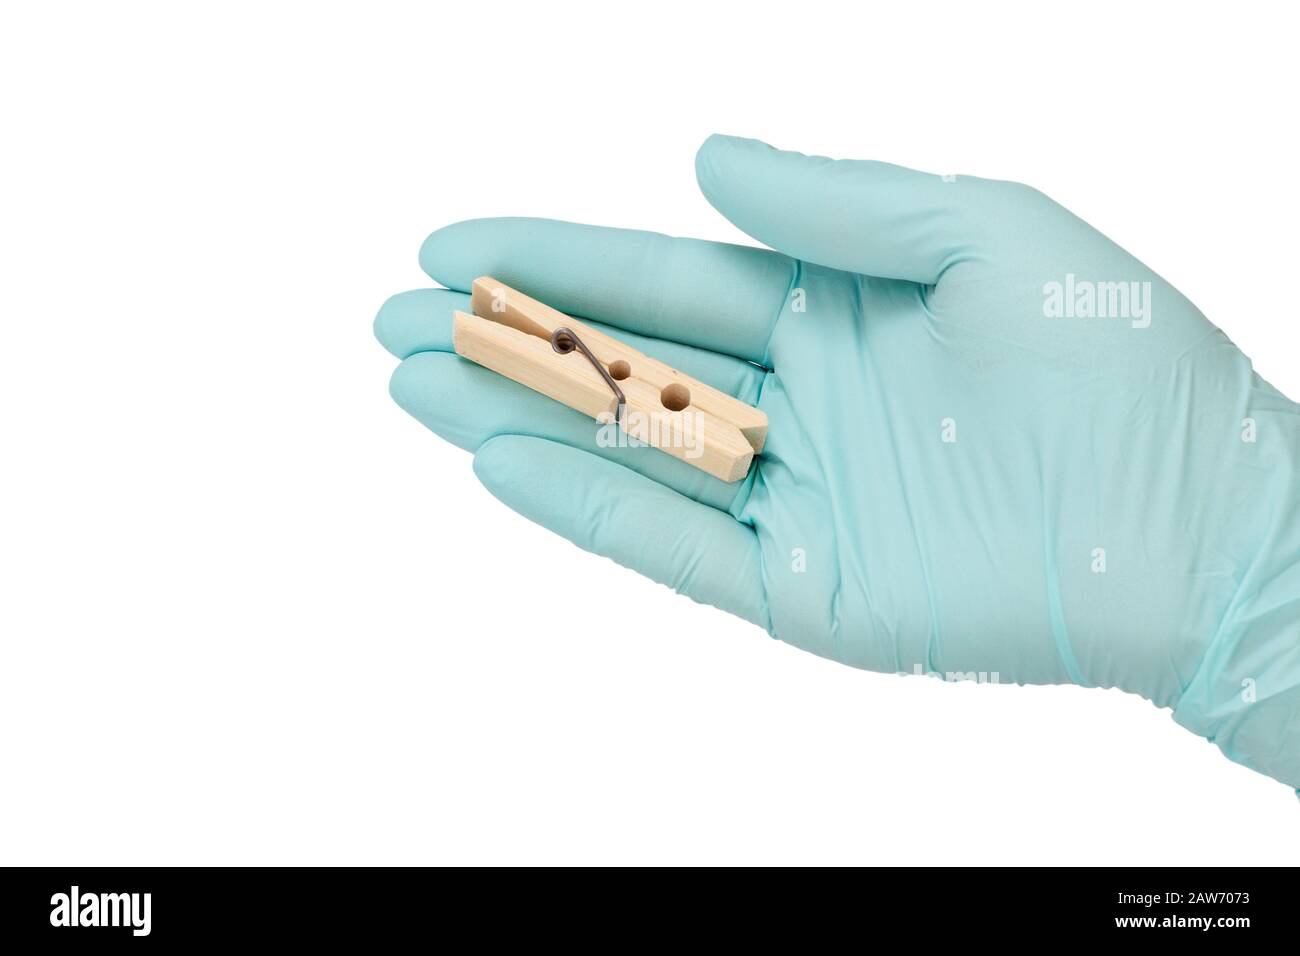 Woman hand in blue latex glove holding a wooden clothespin on a white isolated background. Stock Photo